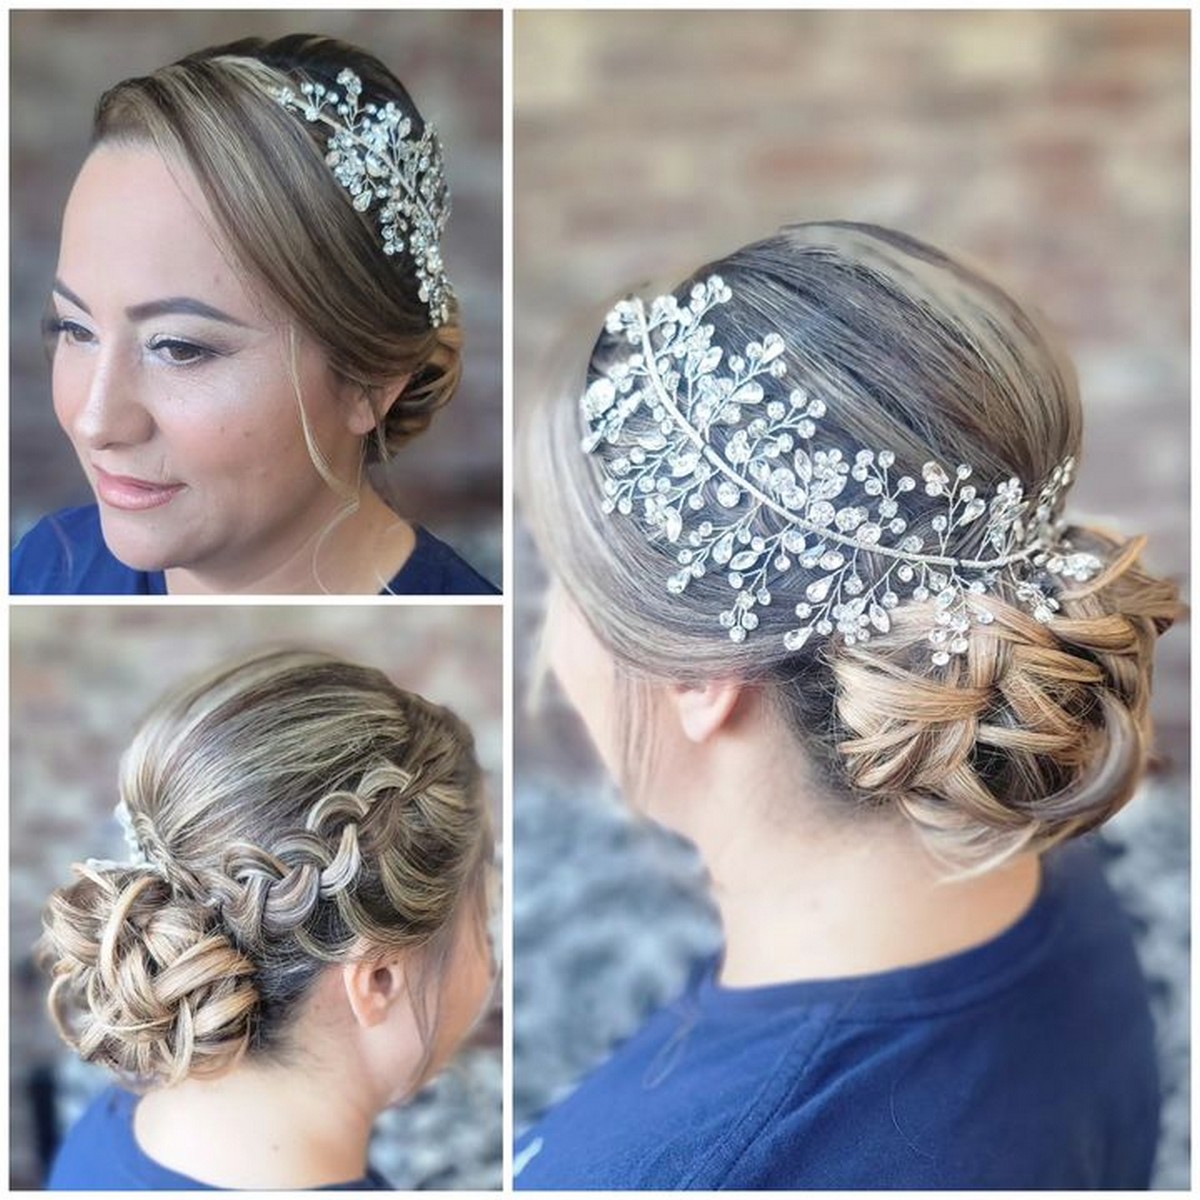 Low Updo And Braid On The Side With Floral Accessories